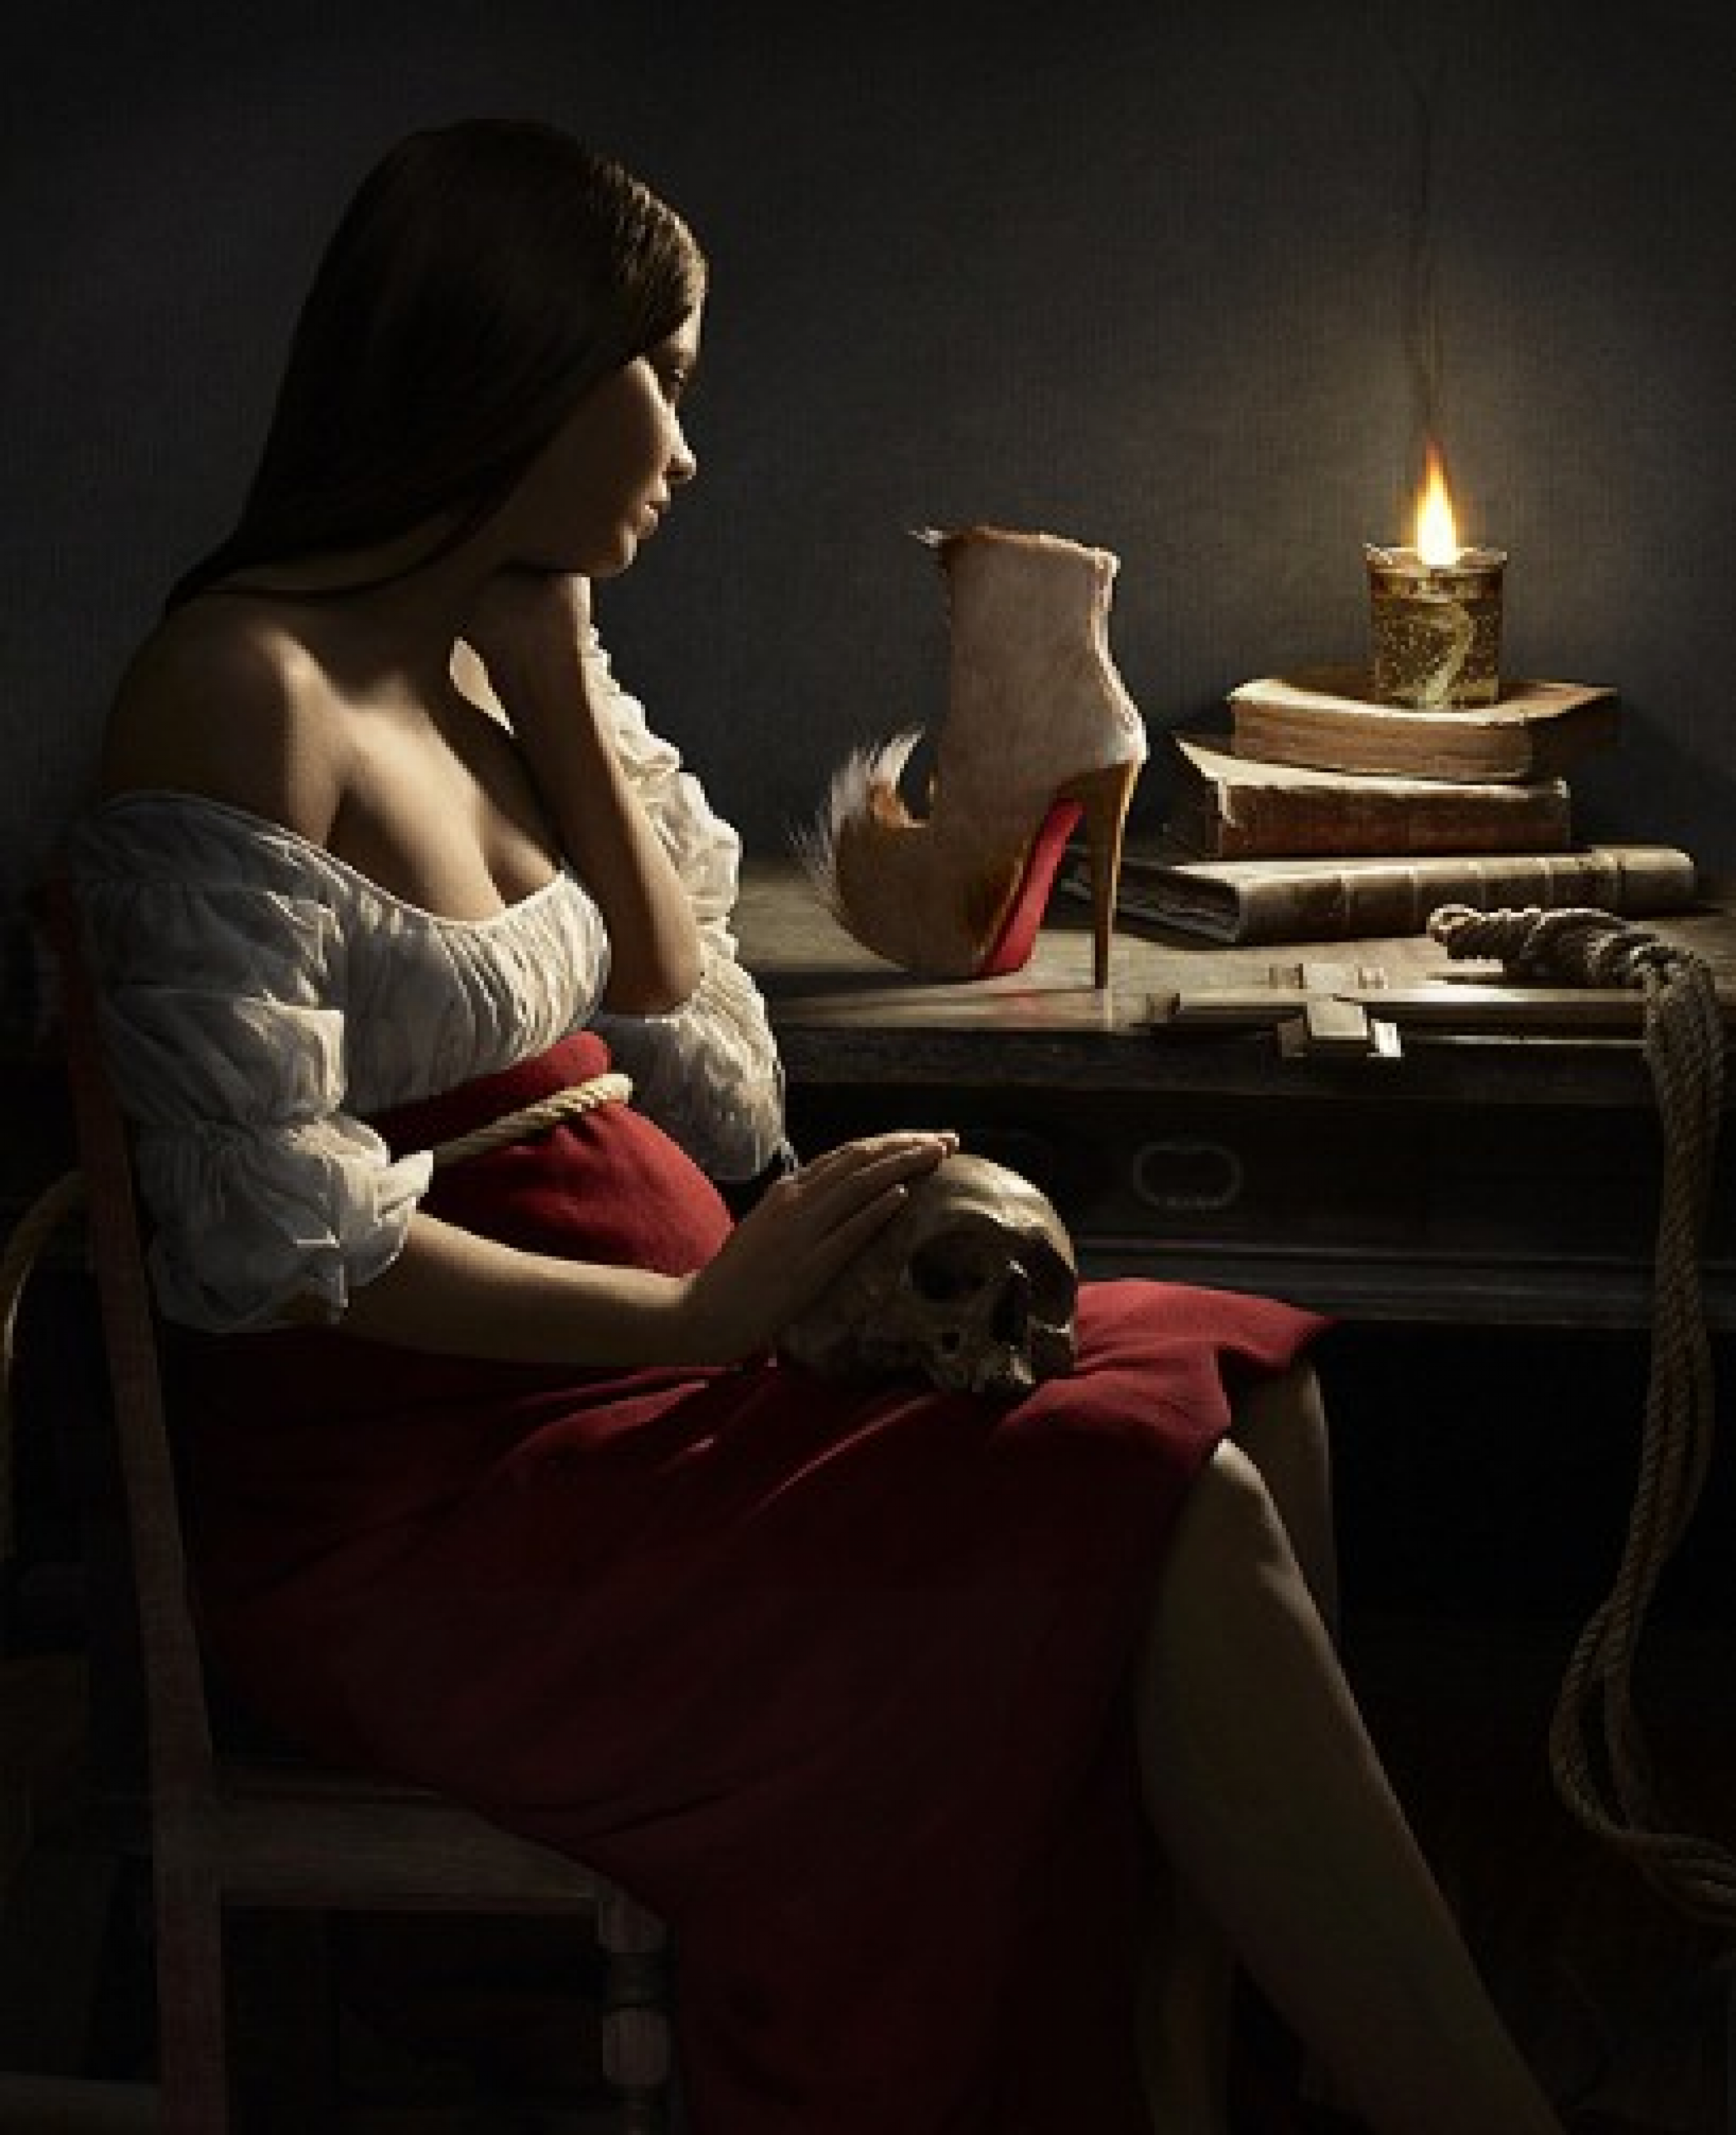 Georges de la Tours Magdalene and the Flame 